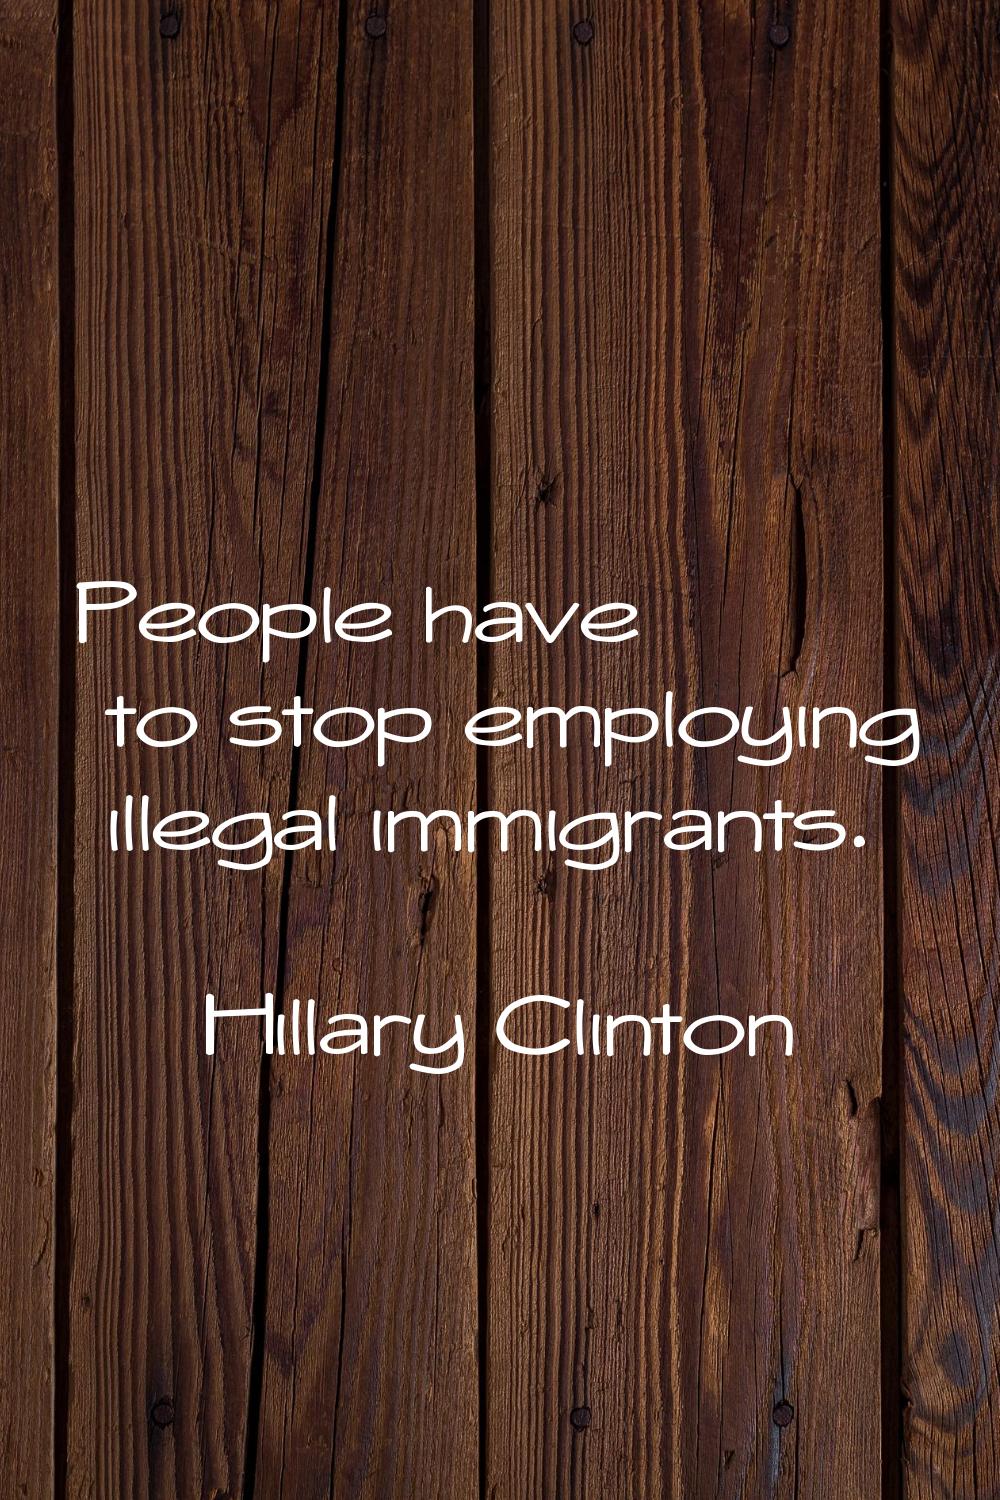 People have to stop employing illegal immigrants.